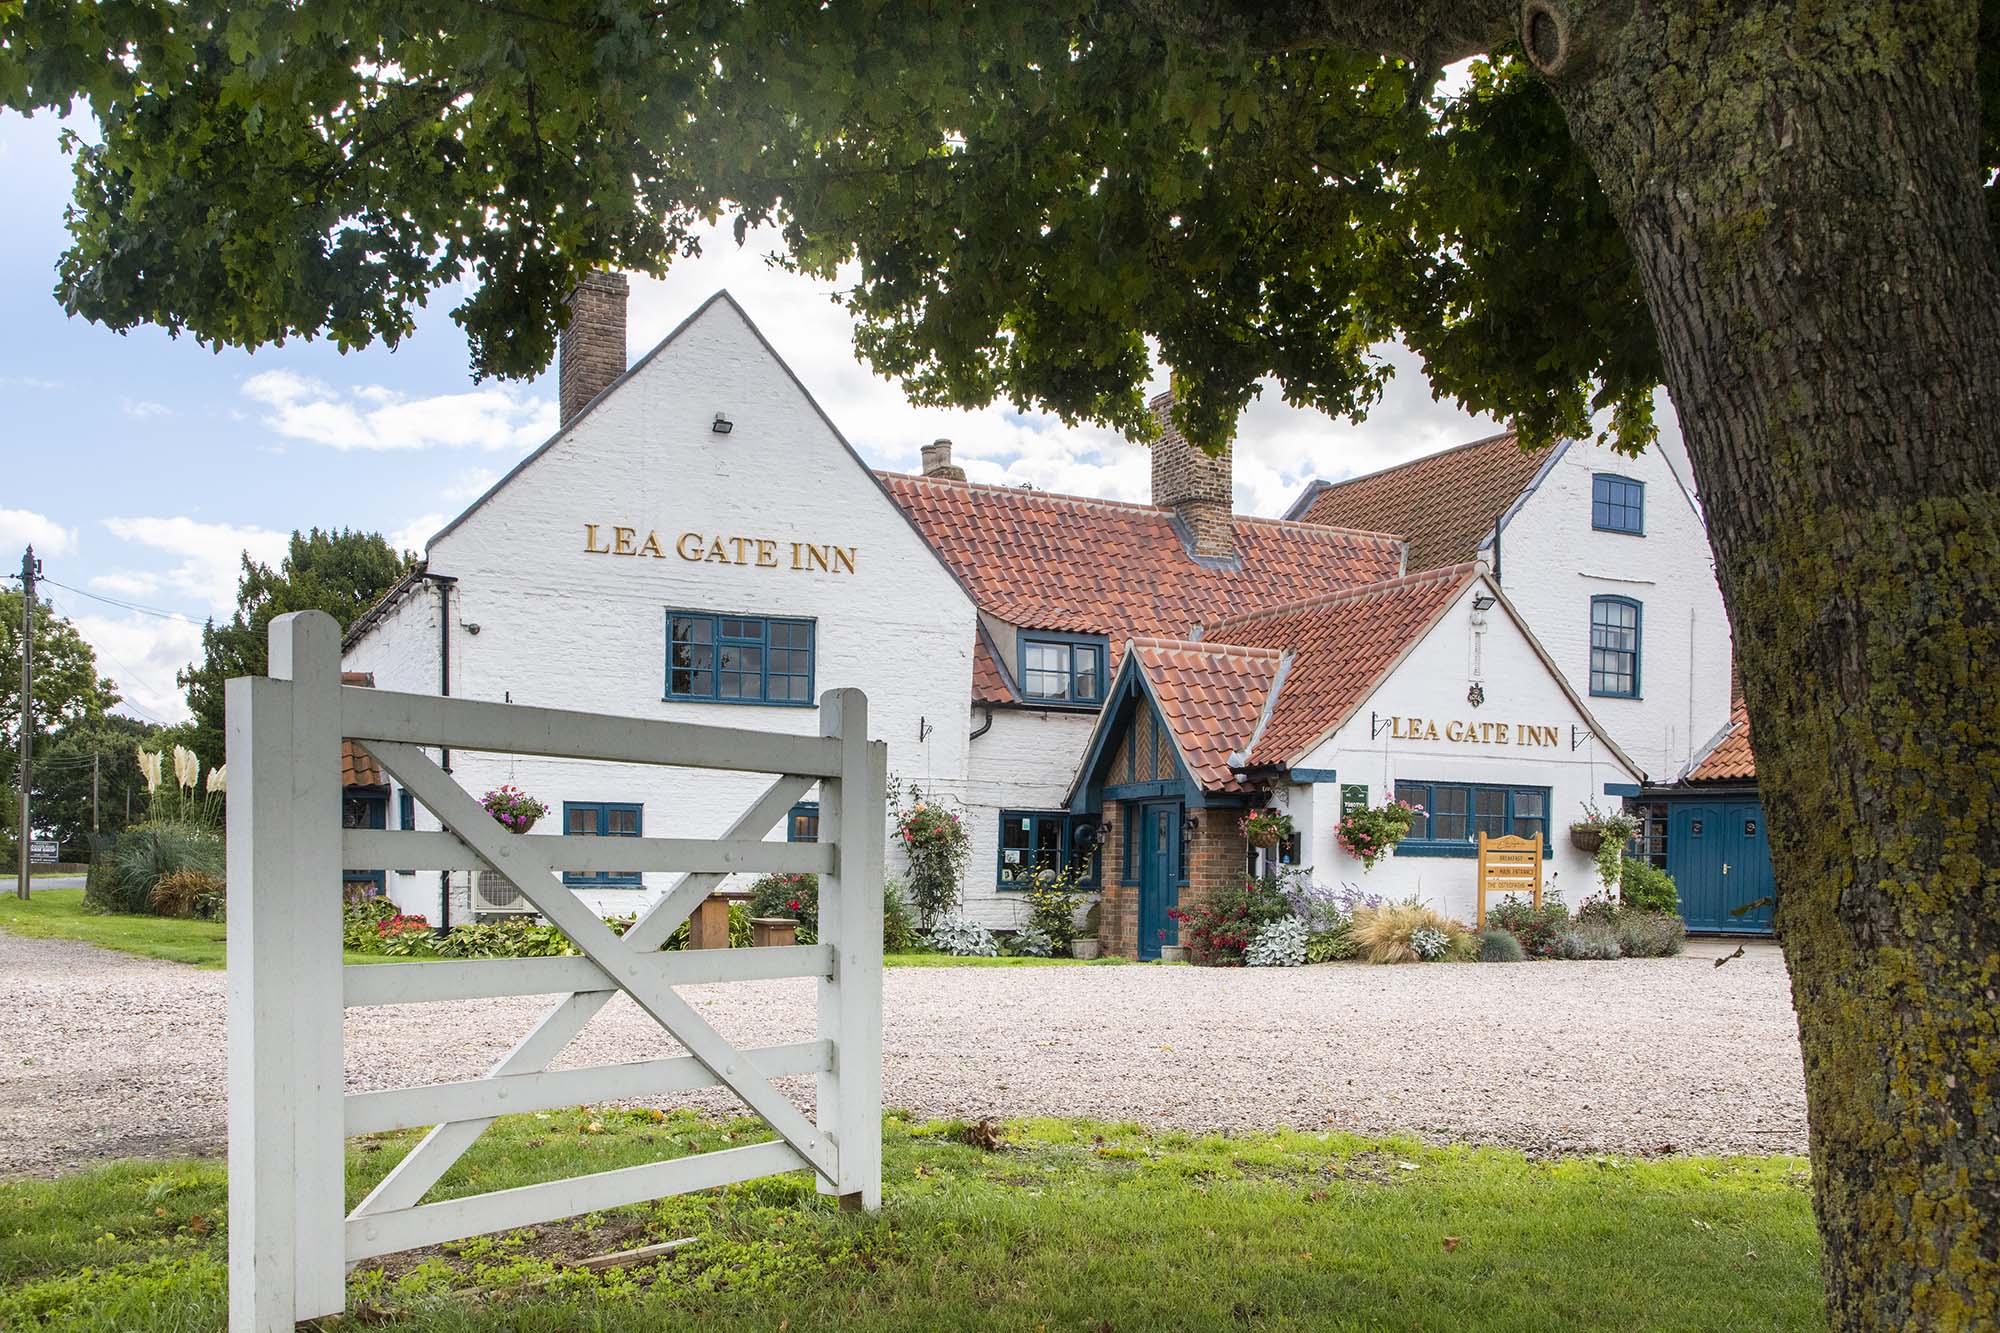 The Leagate Inn, Coningsby